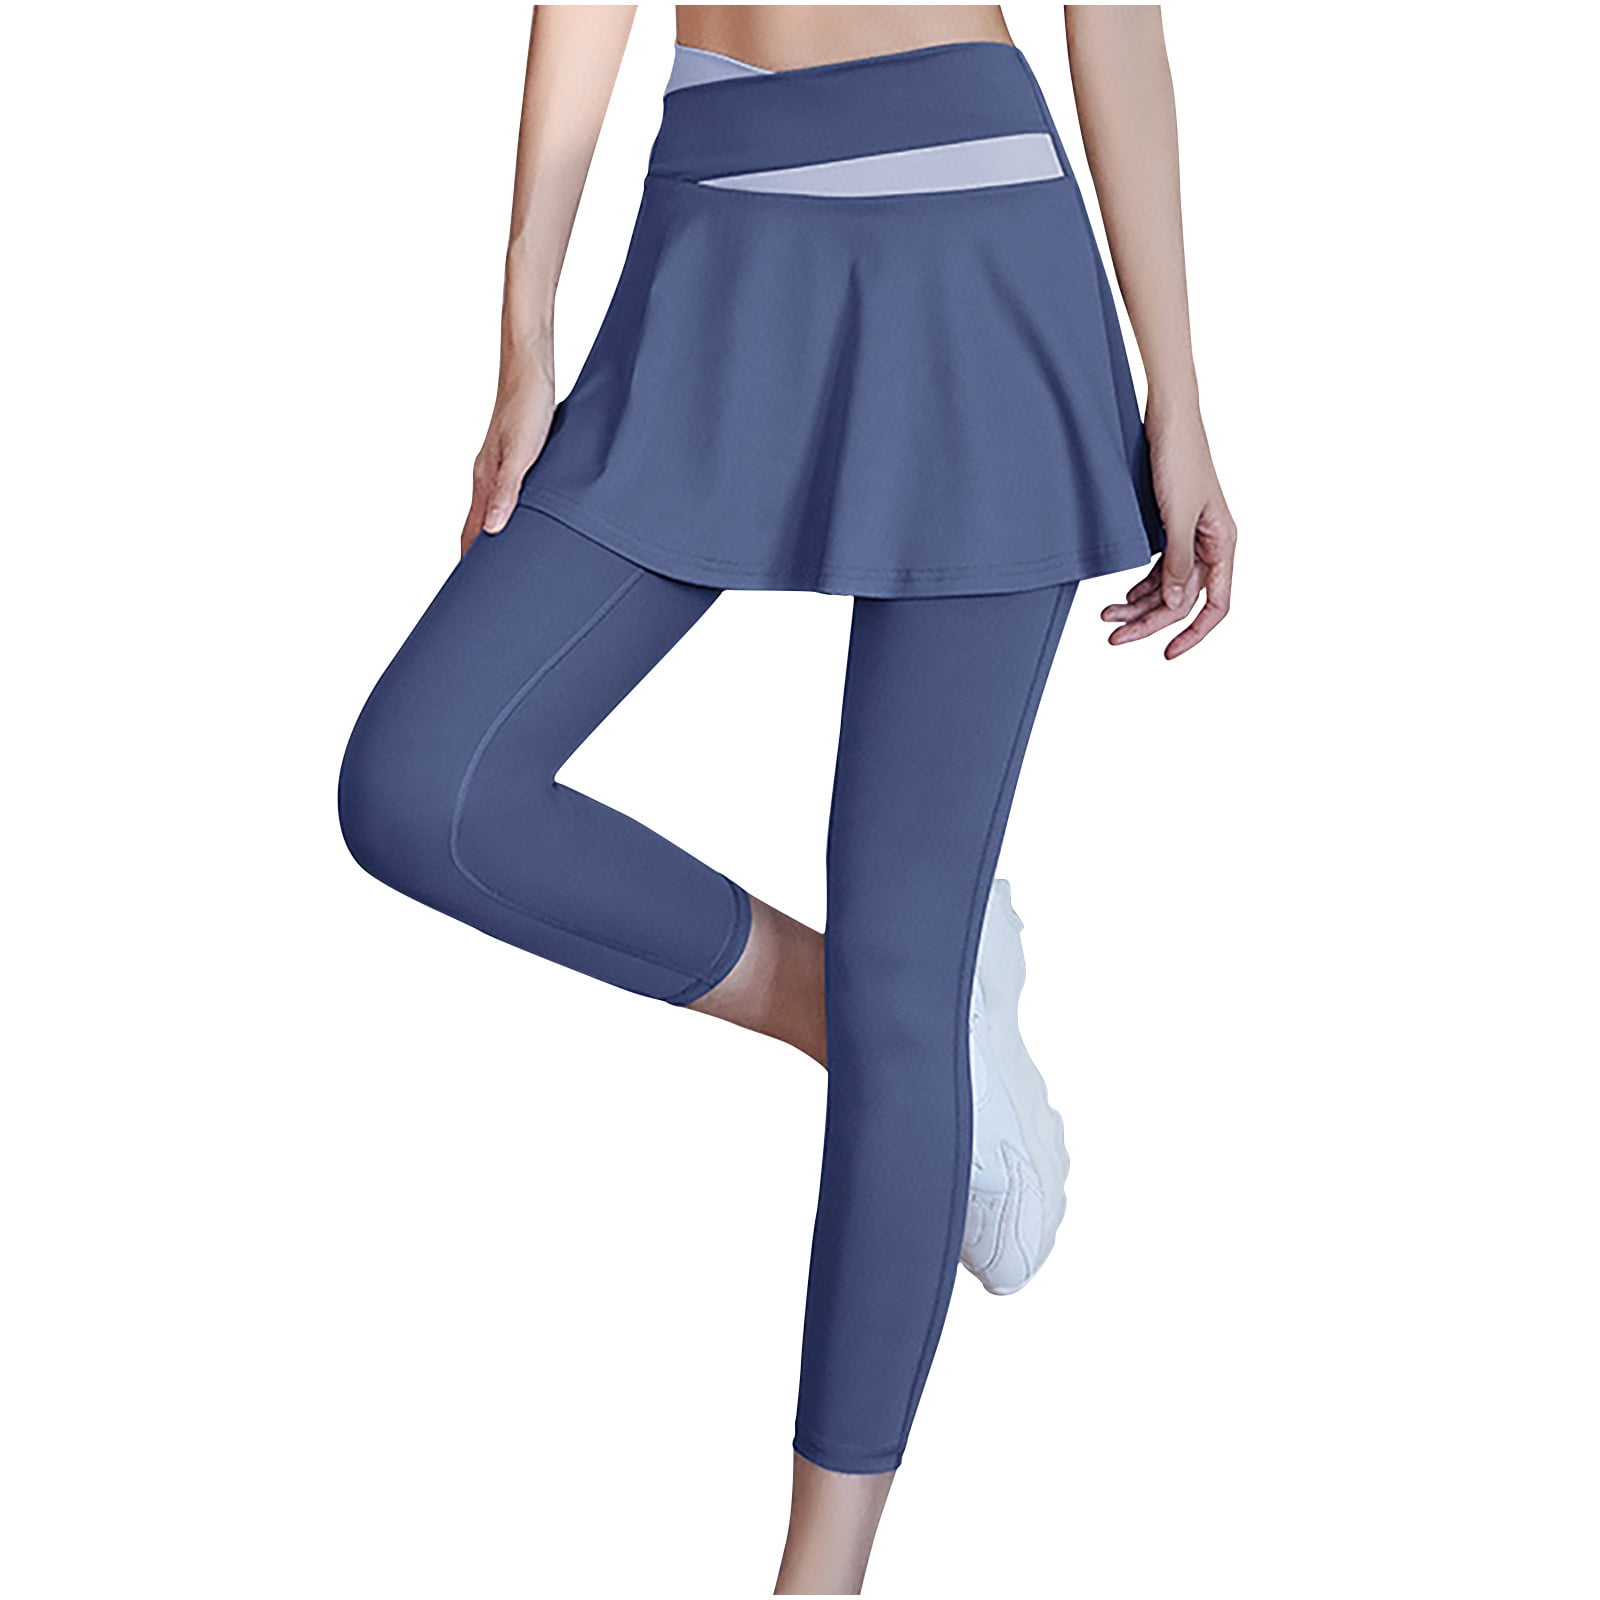 JWZUY Yoga Skirted Leggings with Pockets Women Active Athletic Ruffle  Pleated Golf Tennis Color Block Skirt Pants Black S 